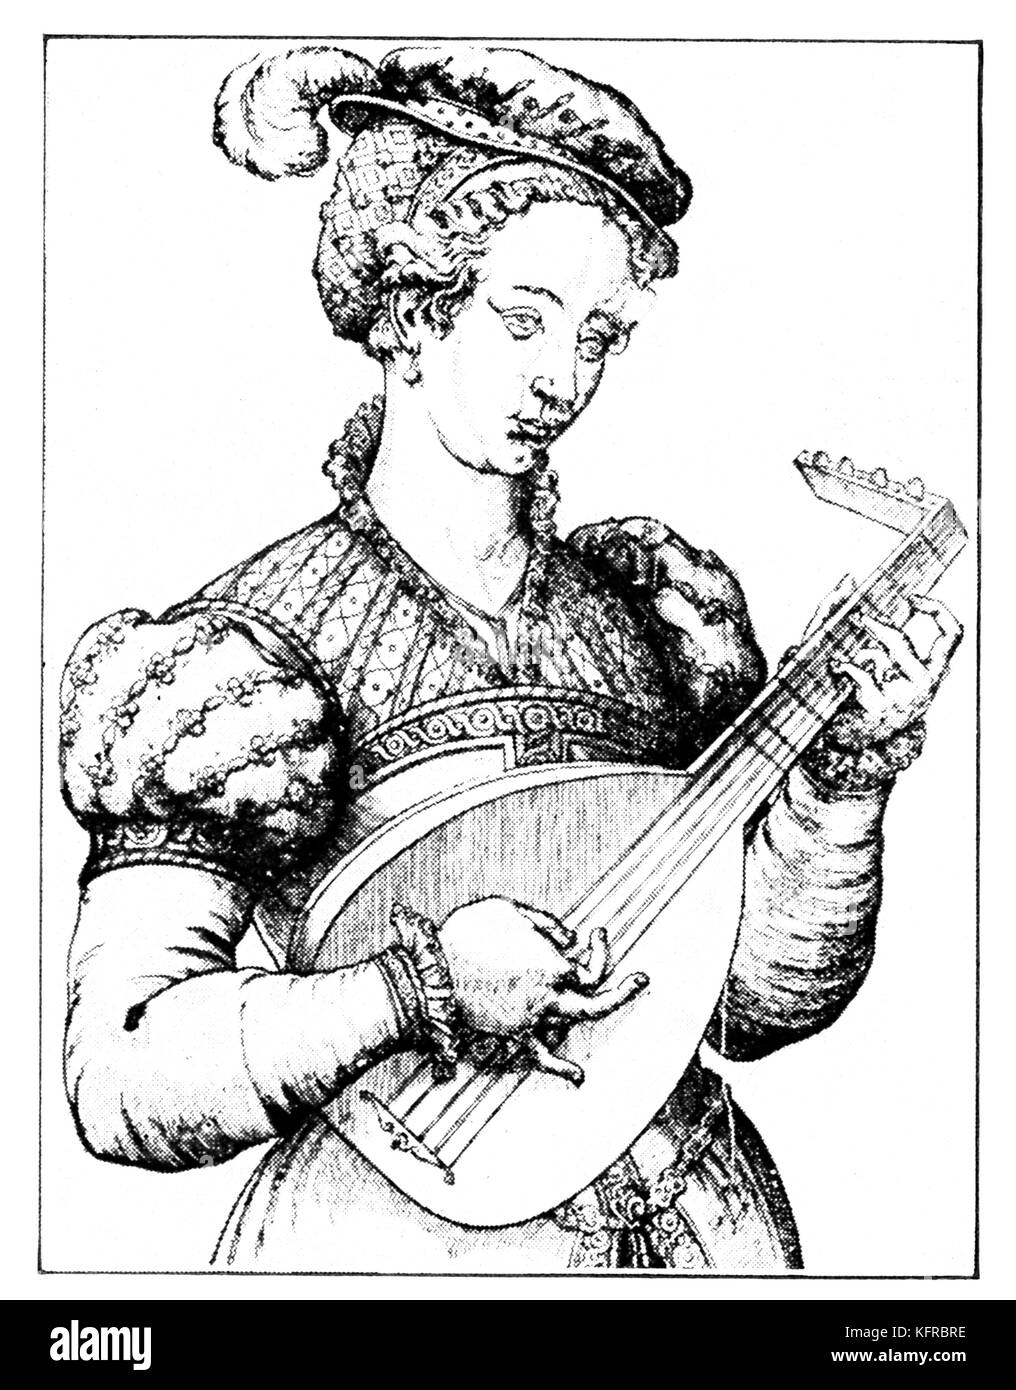 'The Consert' - unsigned series of French woodcuts, c. 1570. Renaissance female Lute-player. Stock Photo